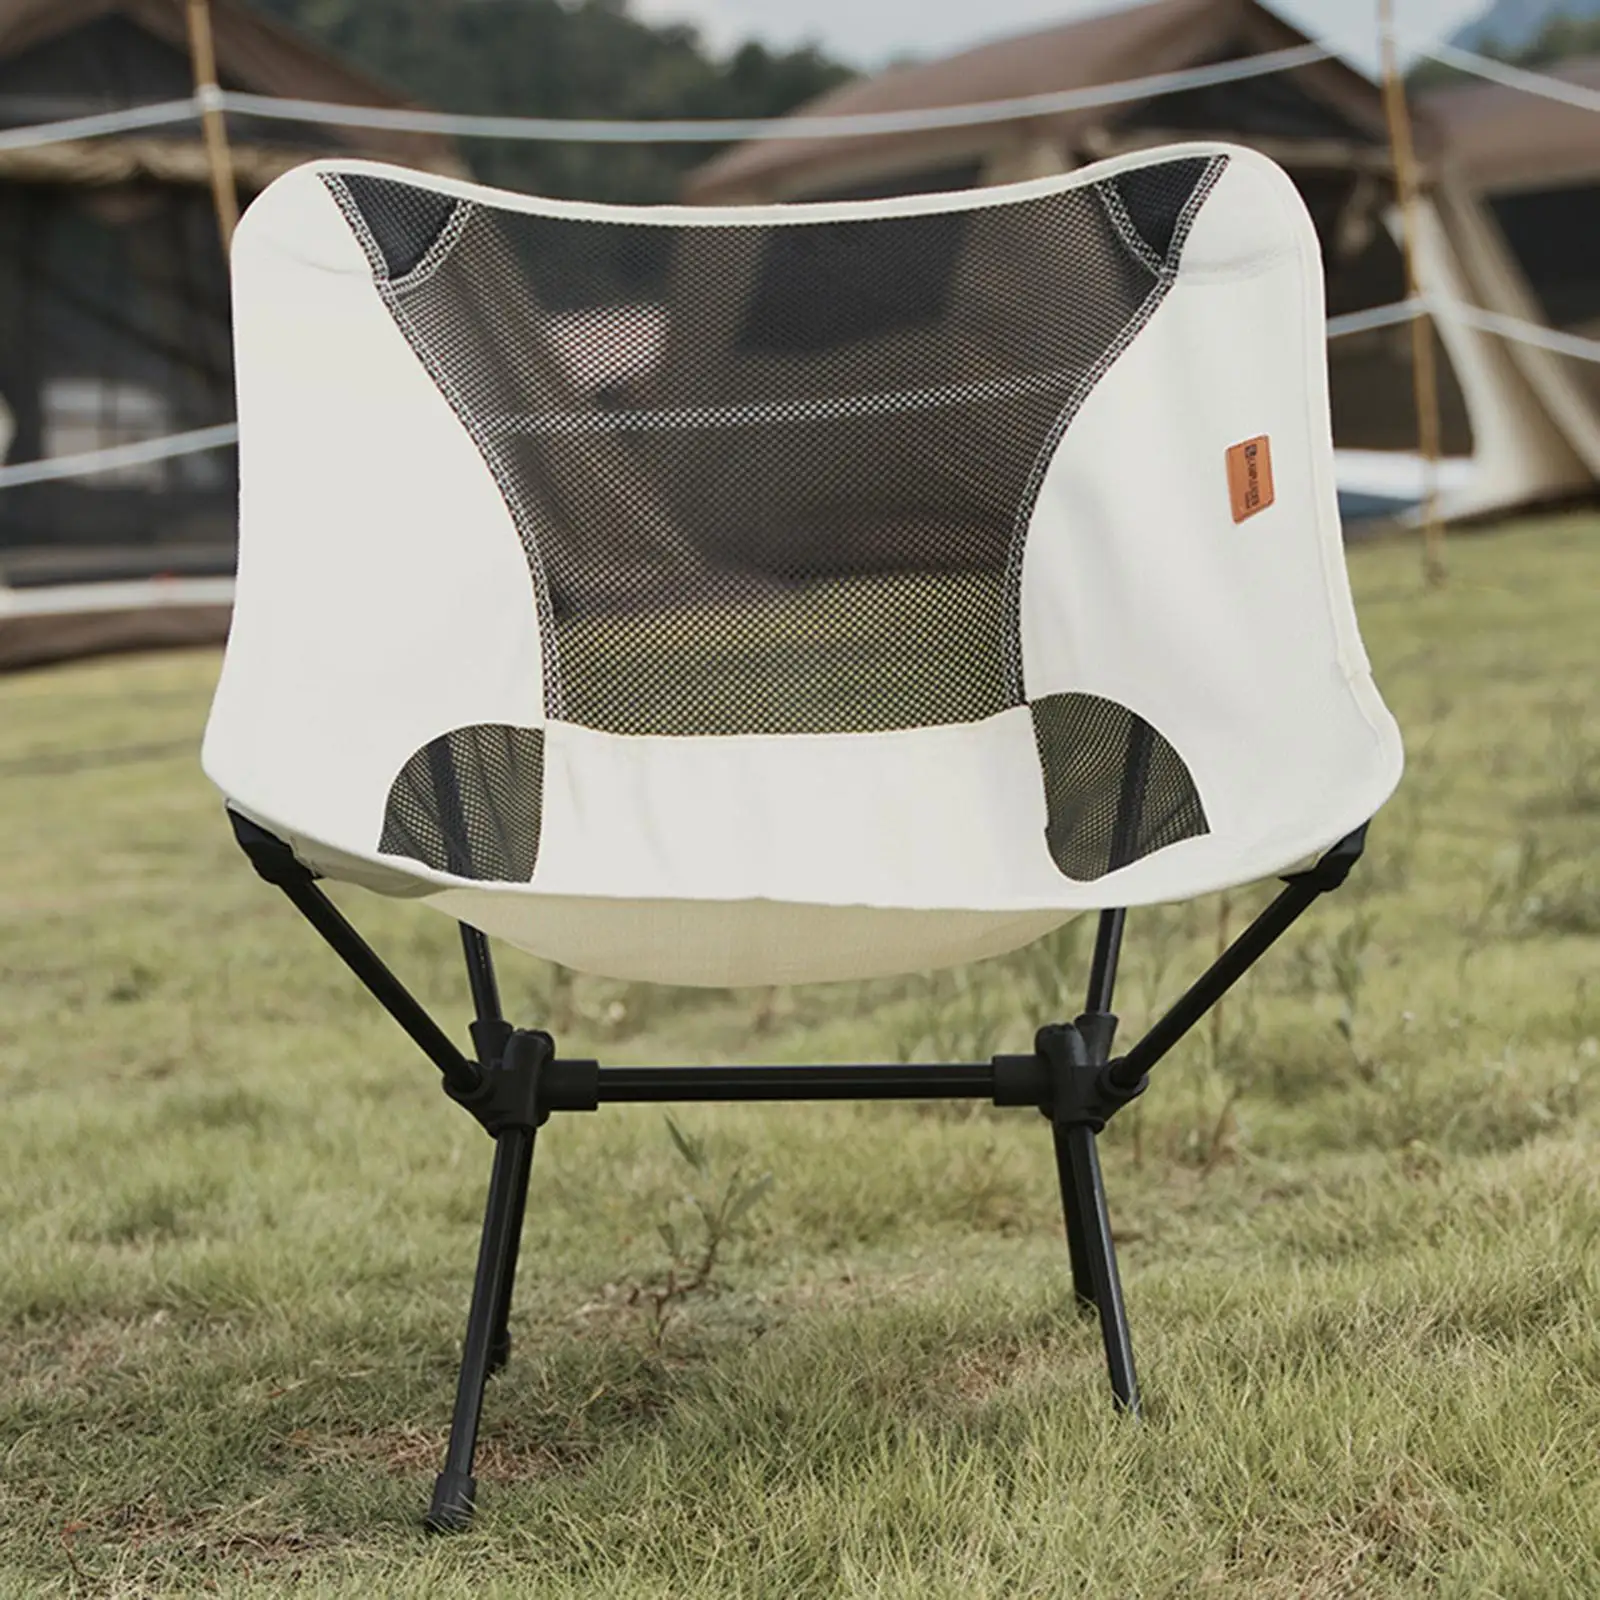 Foldable Moon Chair Portable Compact Furniture for Outdoor Hiking Camping